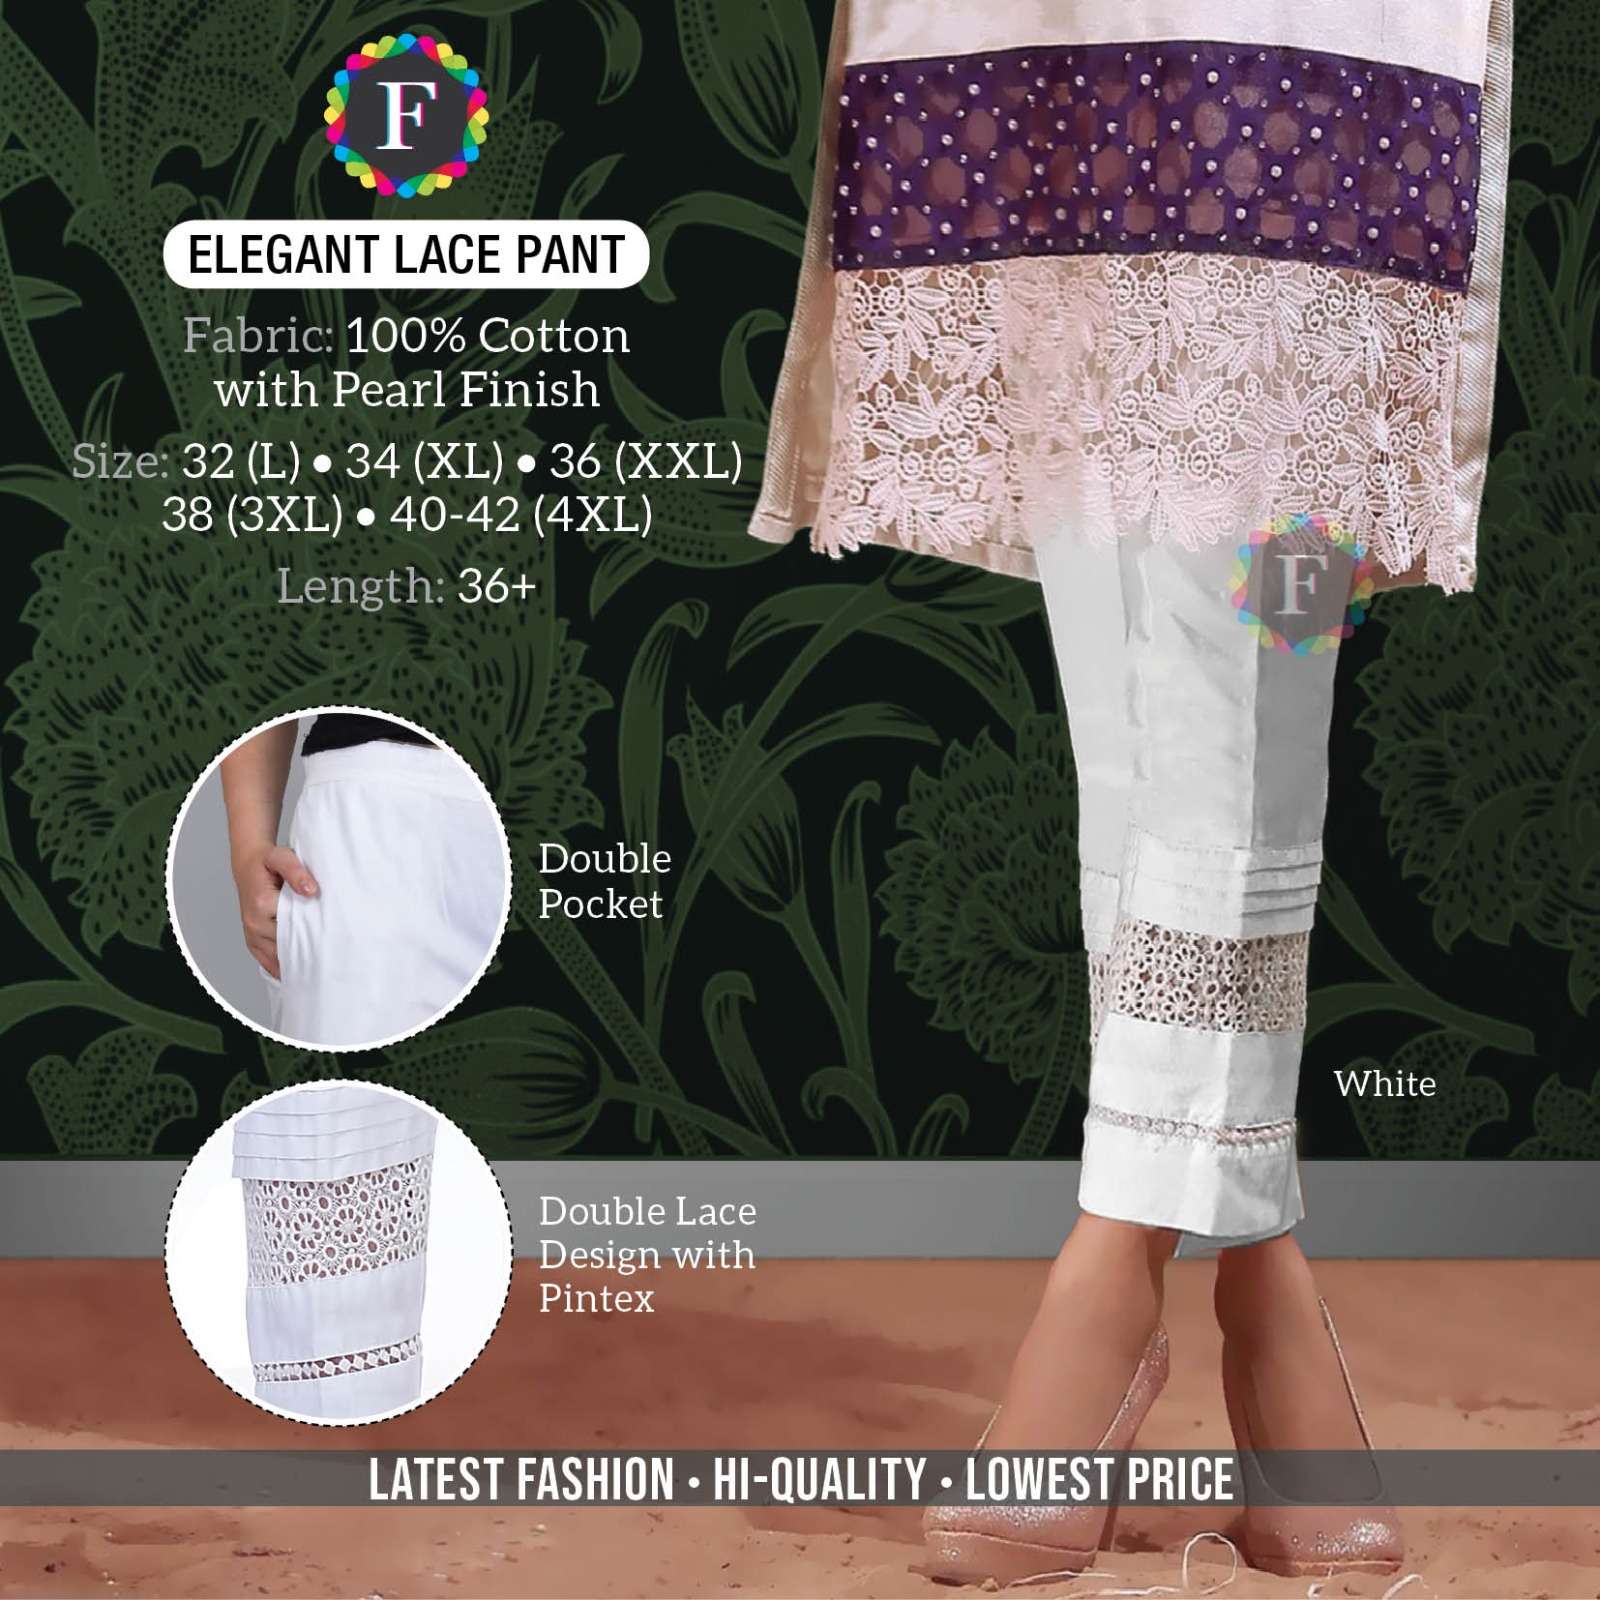 Elegant Lace Pant Fancy Bottom Wear Cotton Pants Collection At Lowest Cost